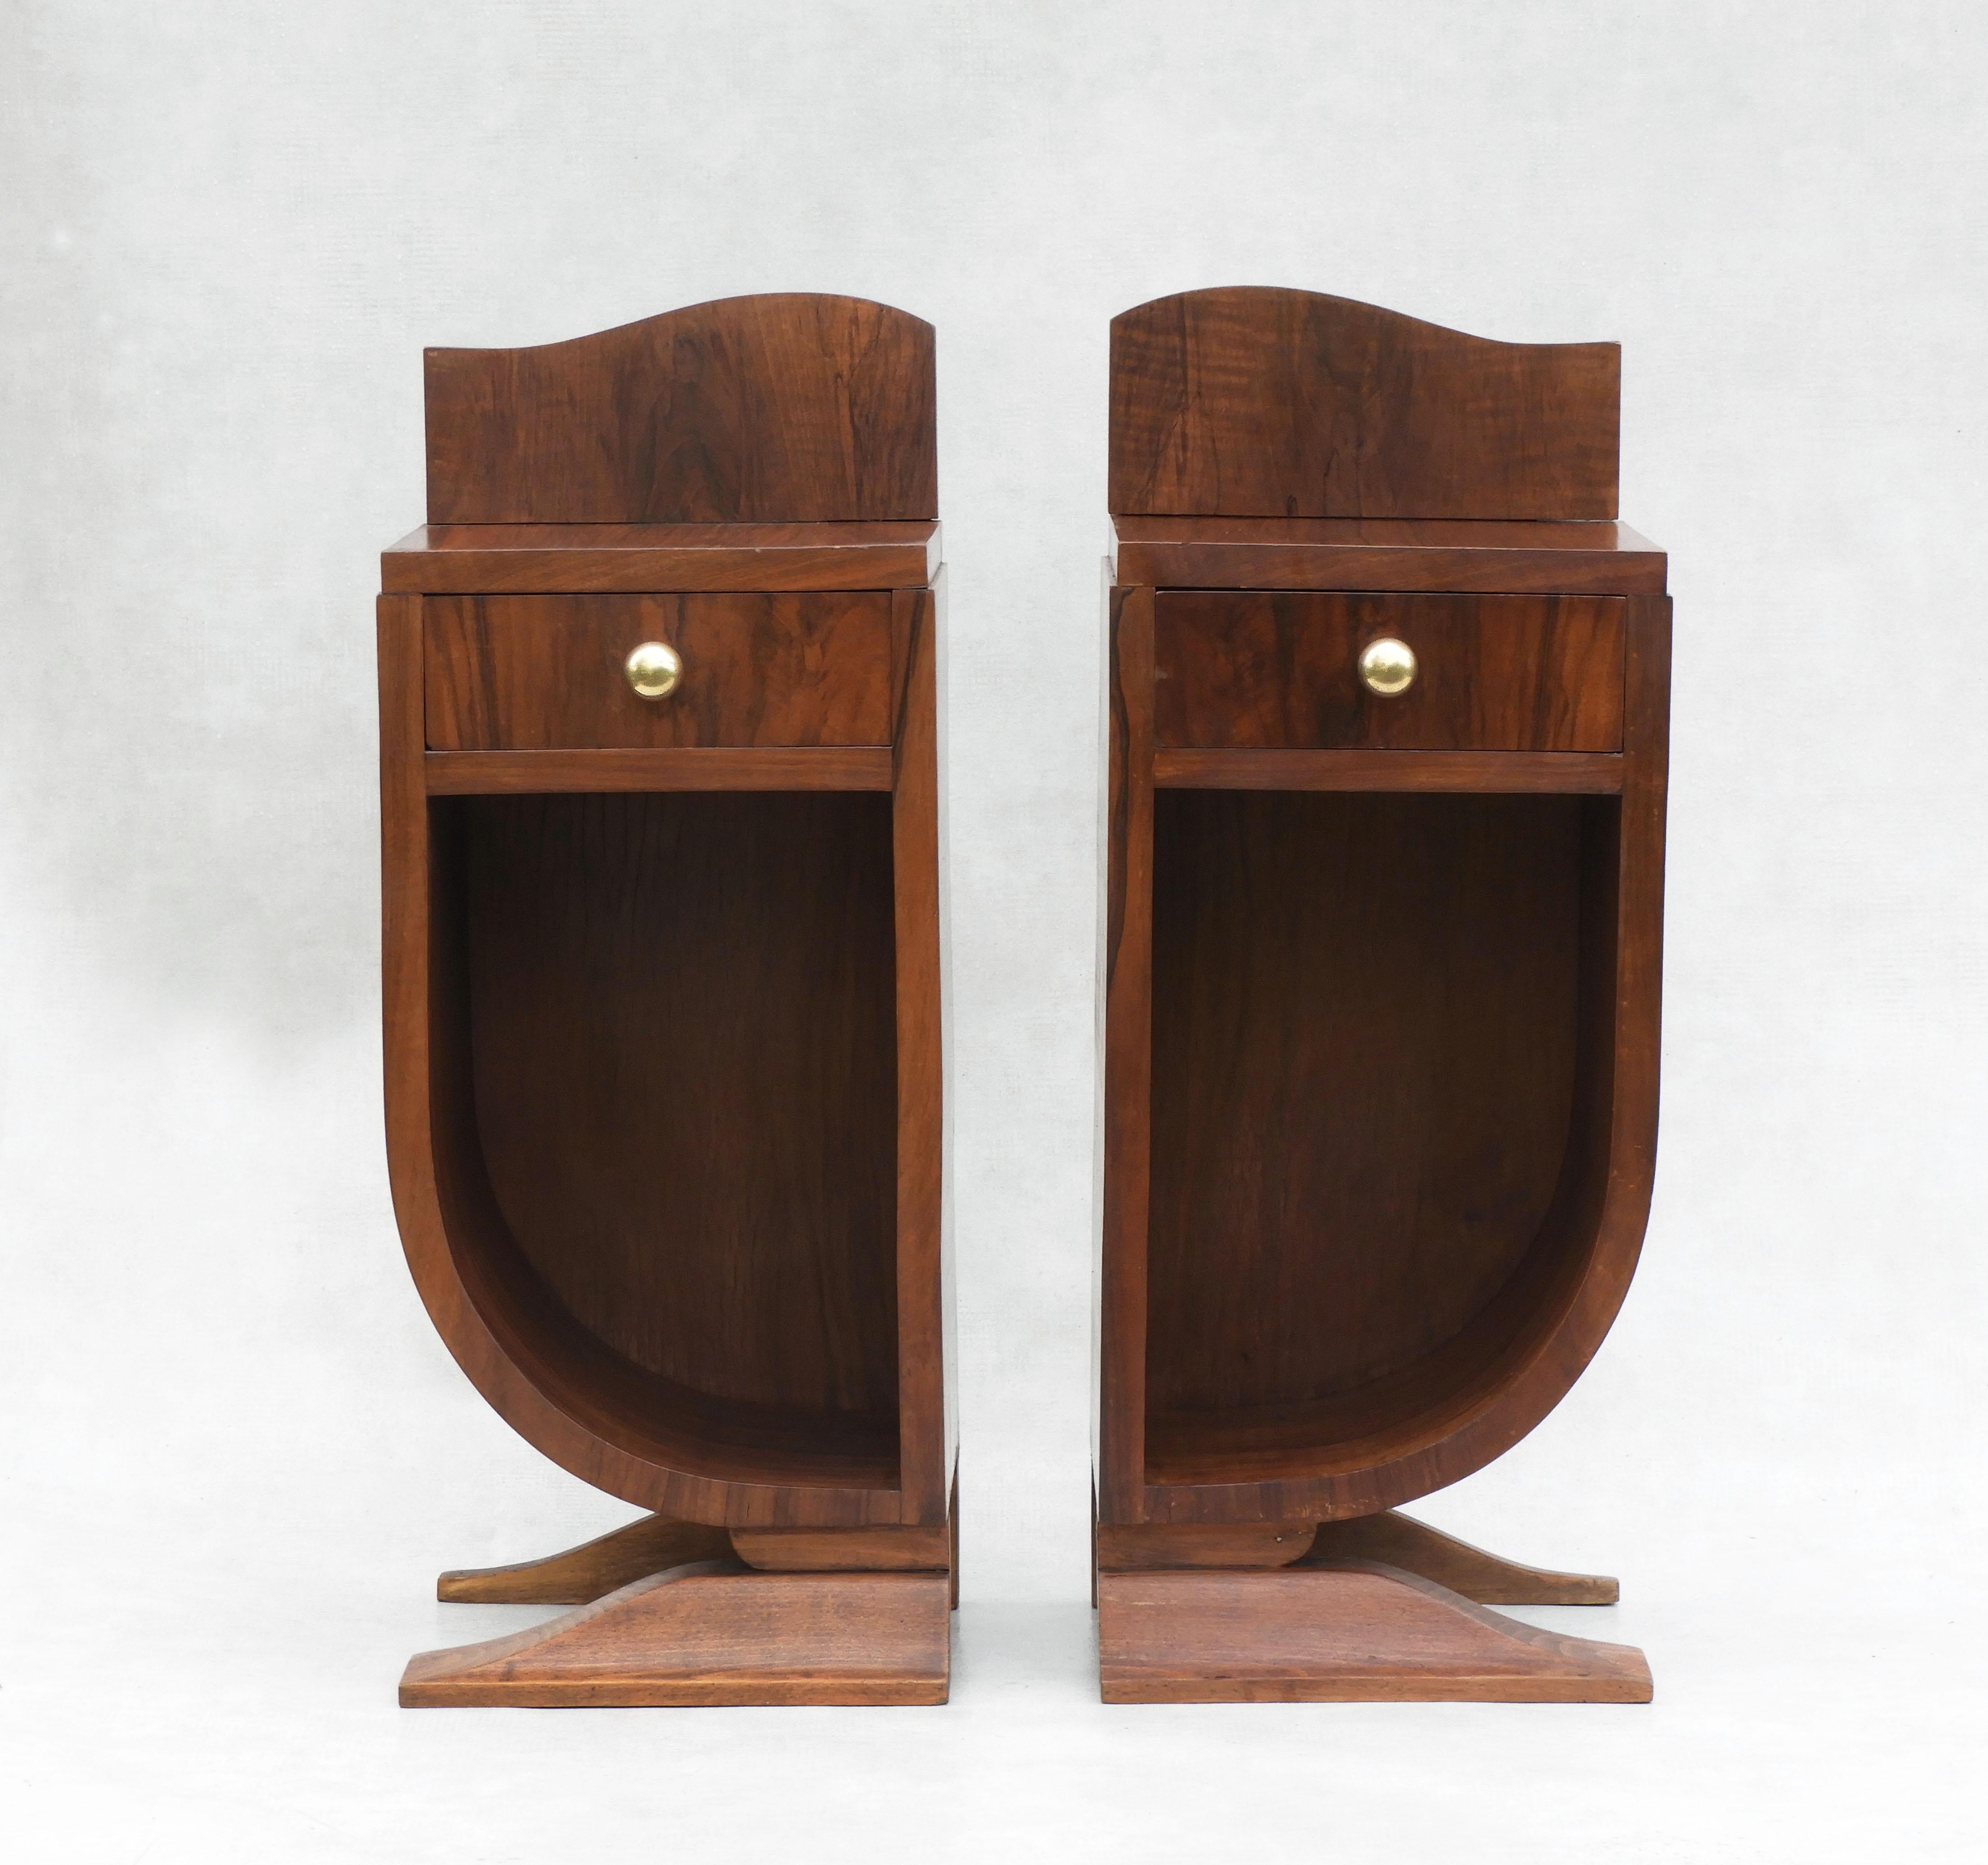 Pair of French Art Deco symmetrical walnut sofa end tables or nightstands C1930. A duo of unusual cabinets each with a single drawer and oversized brass ball handle. Perfect tables for either end of a sofa or as nightstands/bedside tables in a